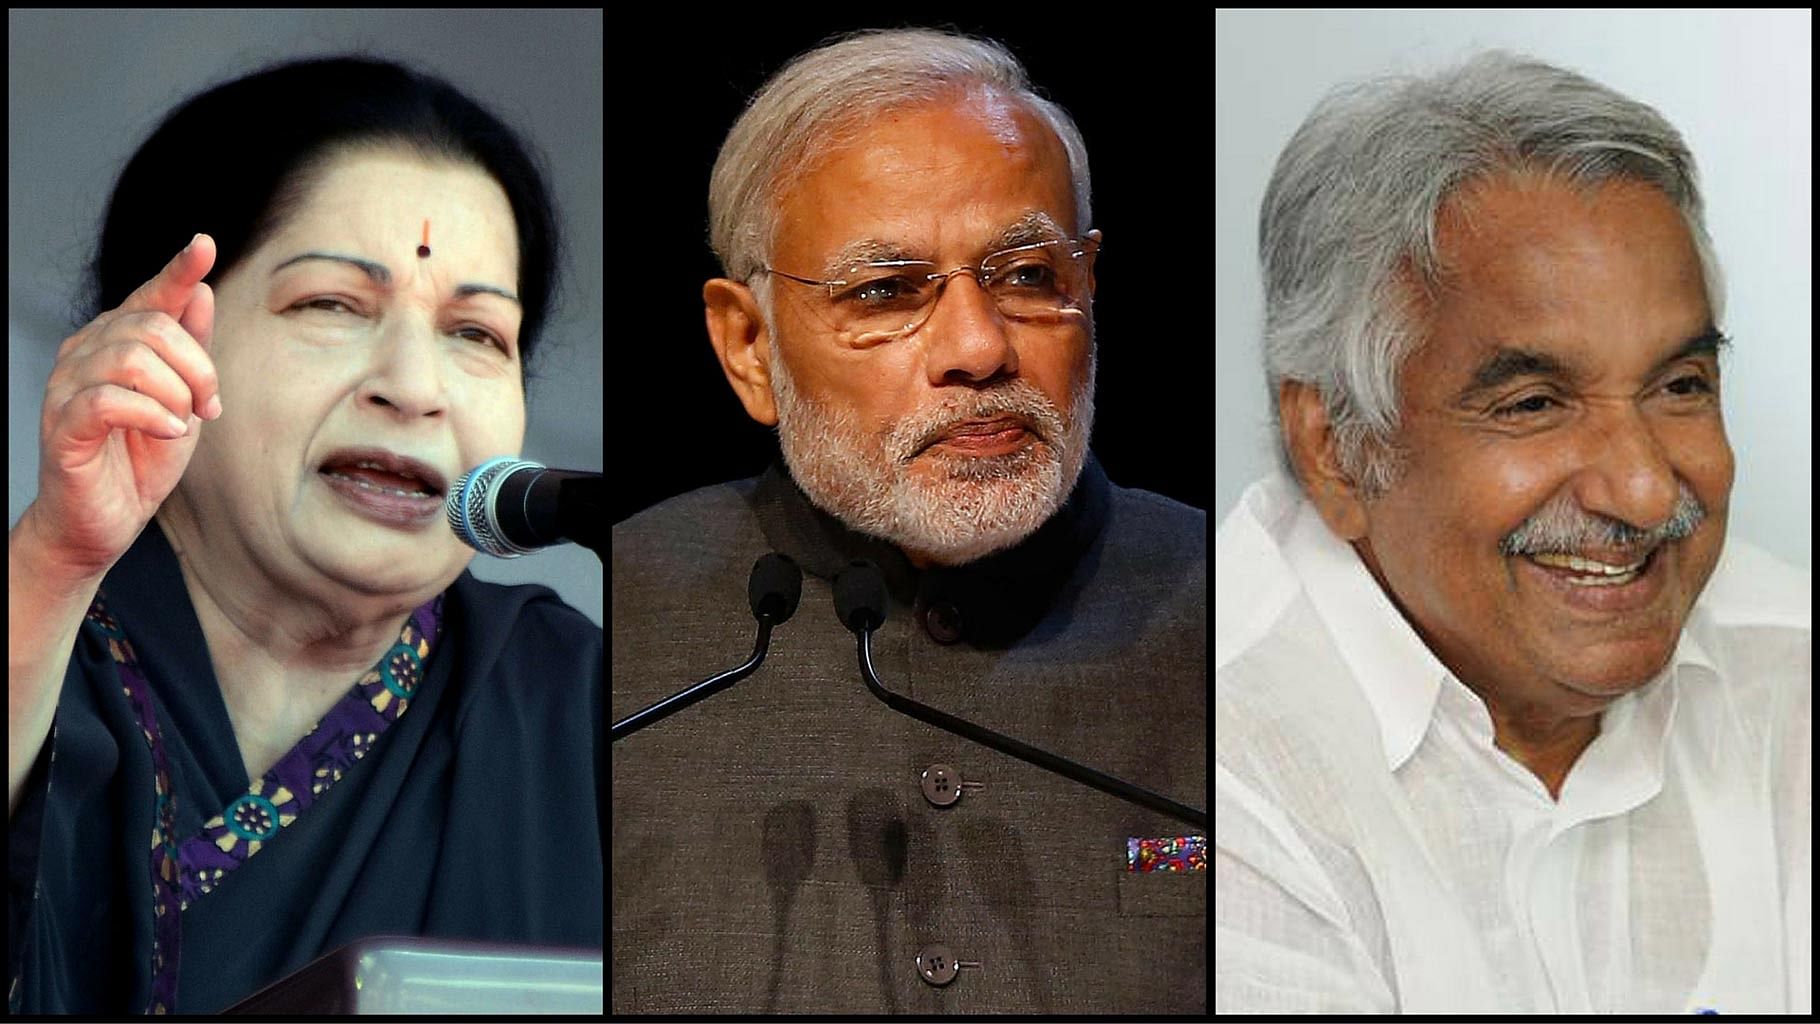 Tamil Nadu Chief Minsiter J Jayalalithaa, Prime Minister Narendra Modi, and Kerala Chief Minister Ommen Chandy (left to right). (Photo: <b>The Quint</b>)